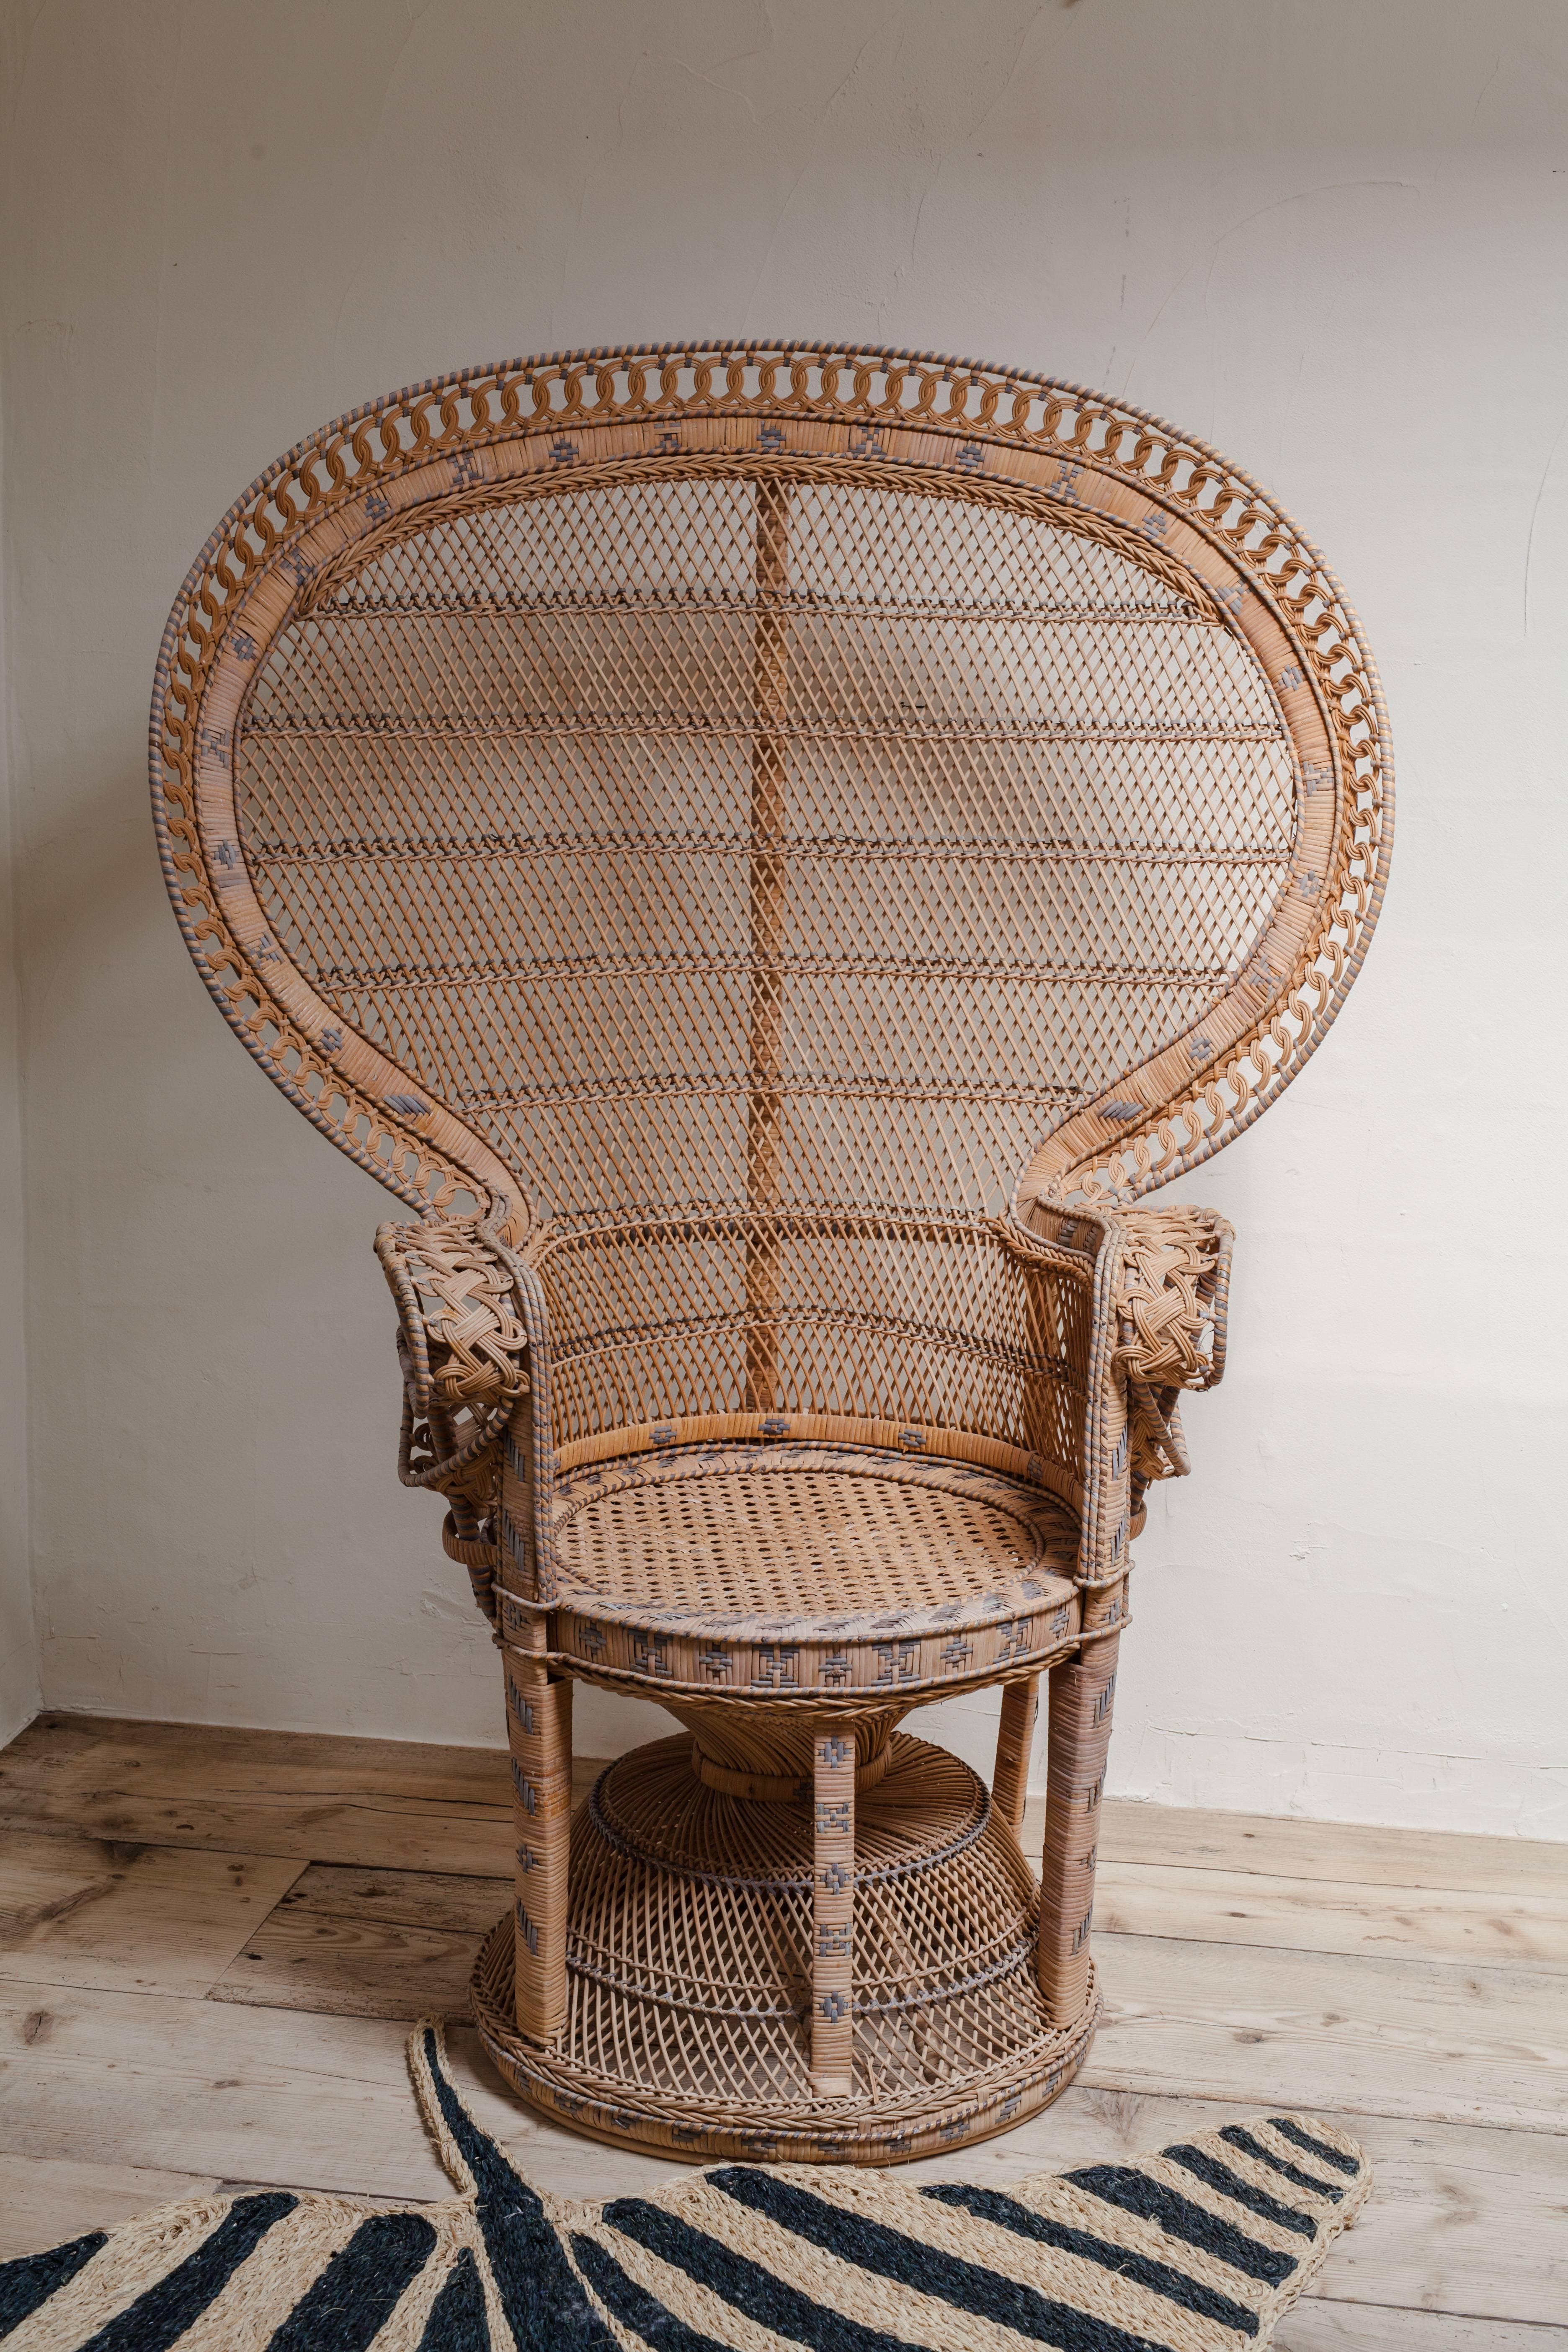 An iconic 1970s wicker/rattan peacock chair, also called the Emanuelle chair.

 